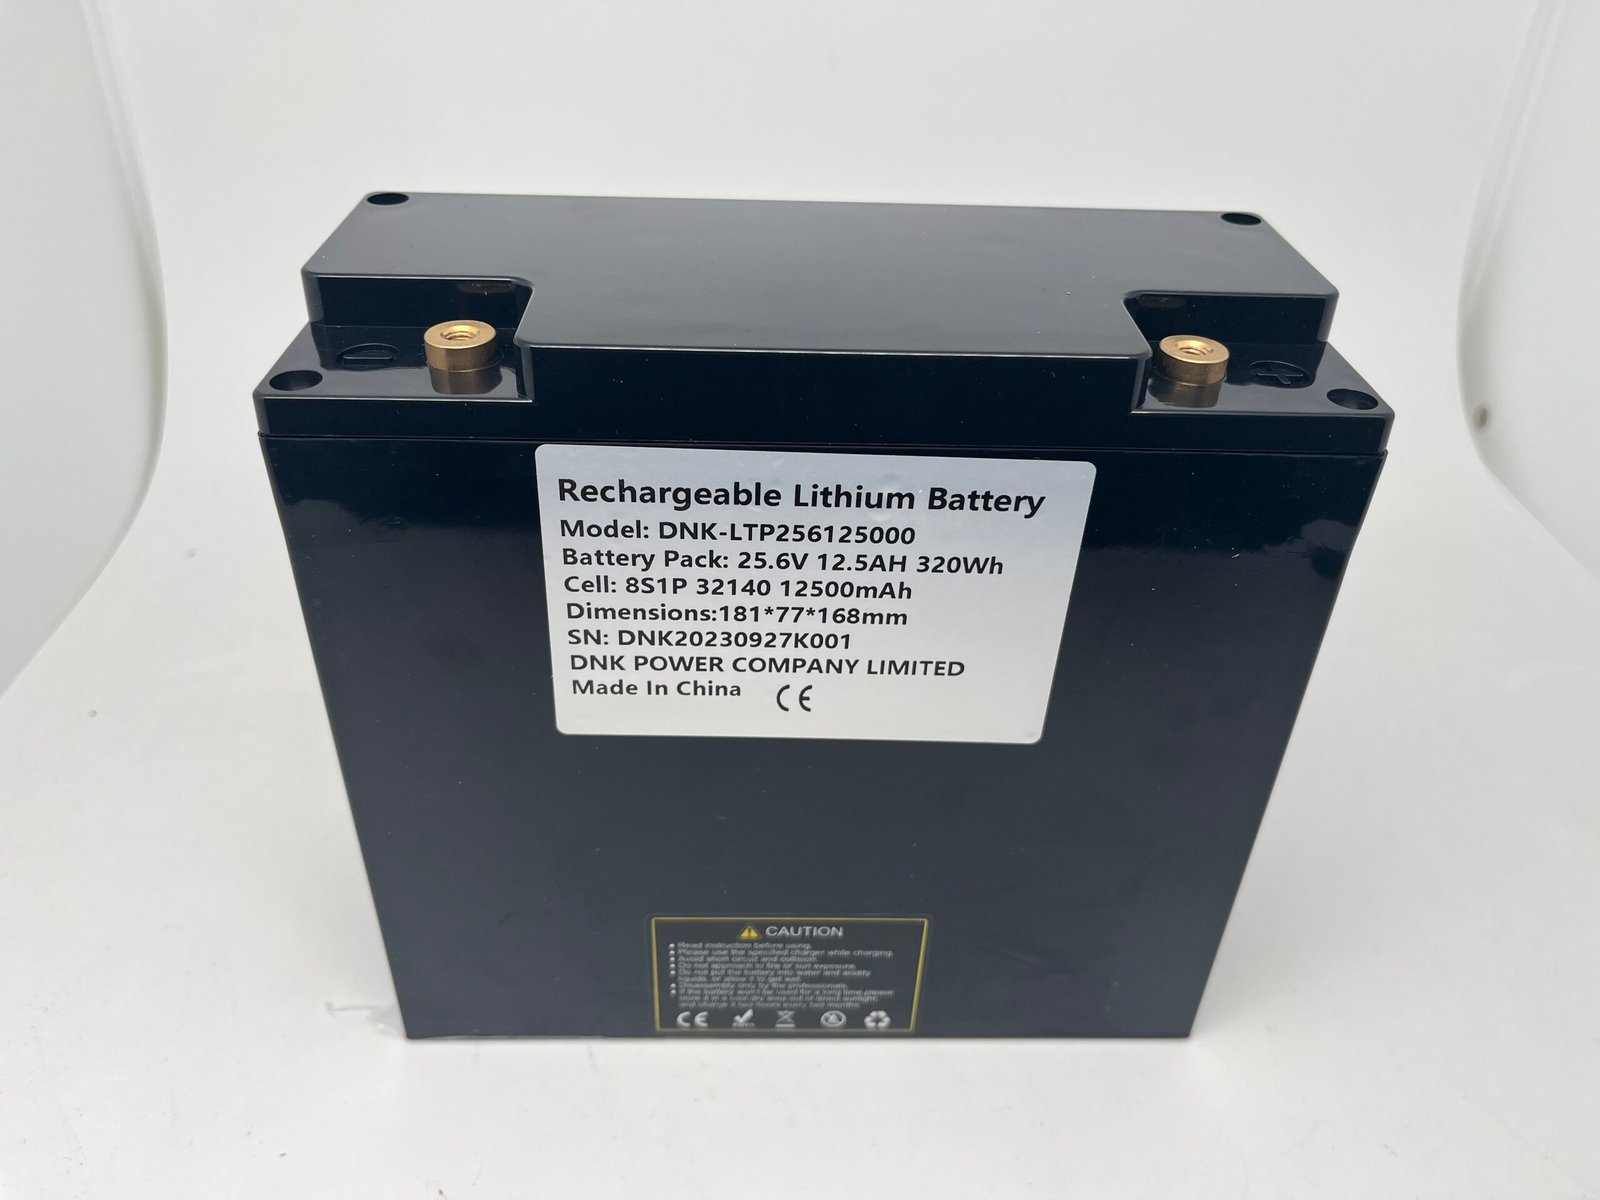 DNK 25.6V 12.5Ah 320WH lifepo4 battery pack